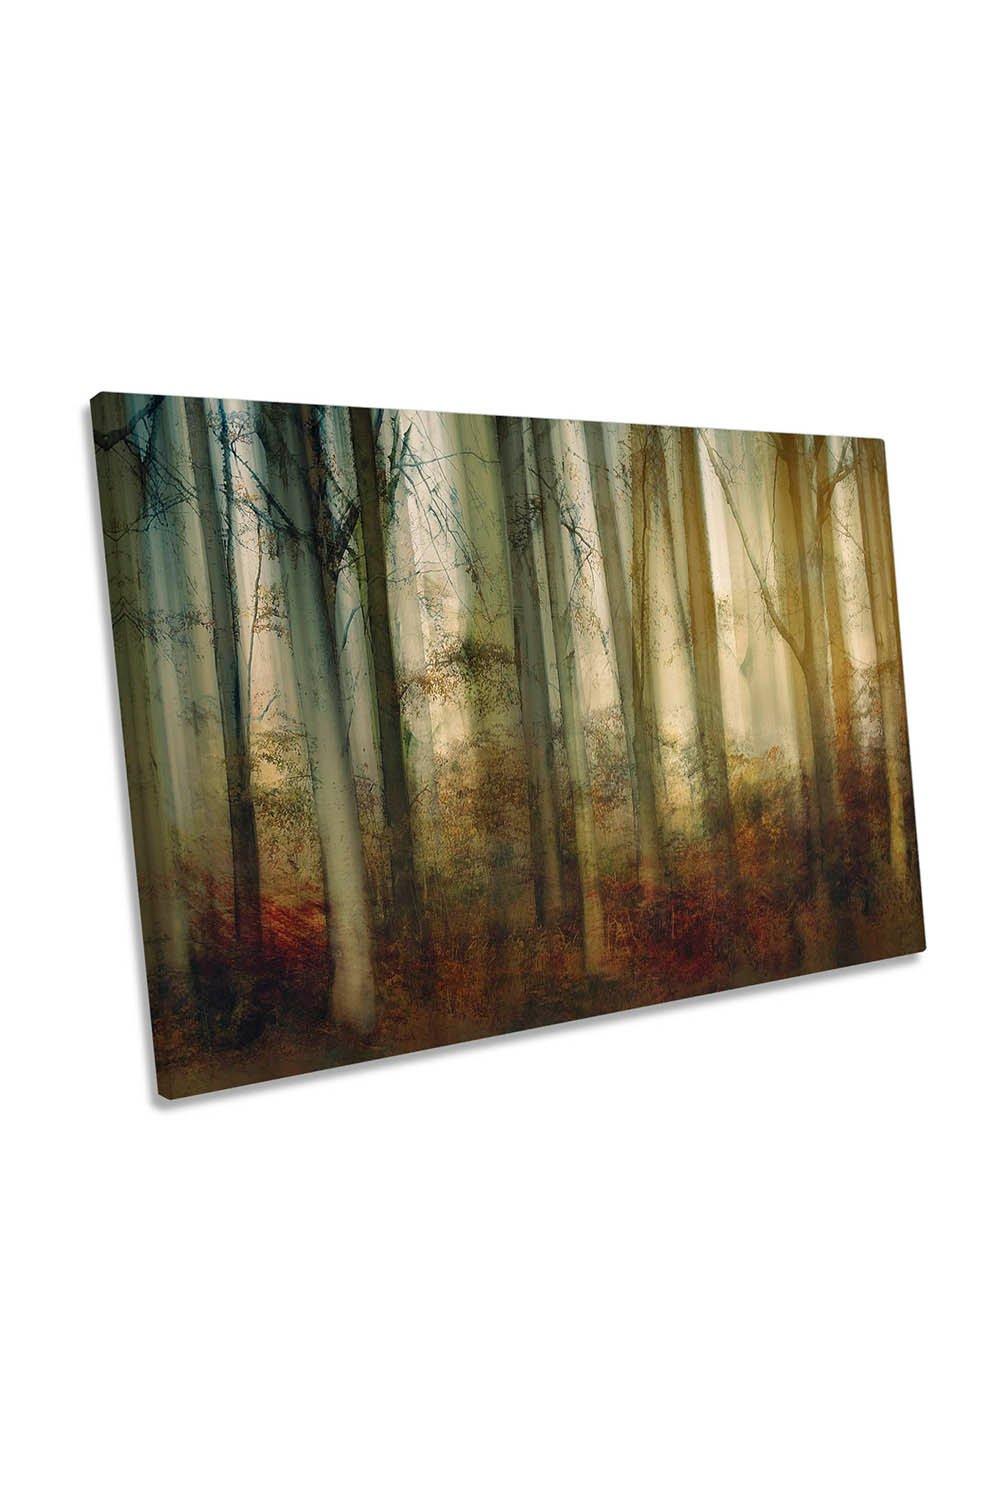 Autumn Light Forest Double Exposure Canvas Wall Art Picture Print